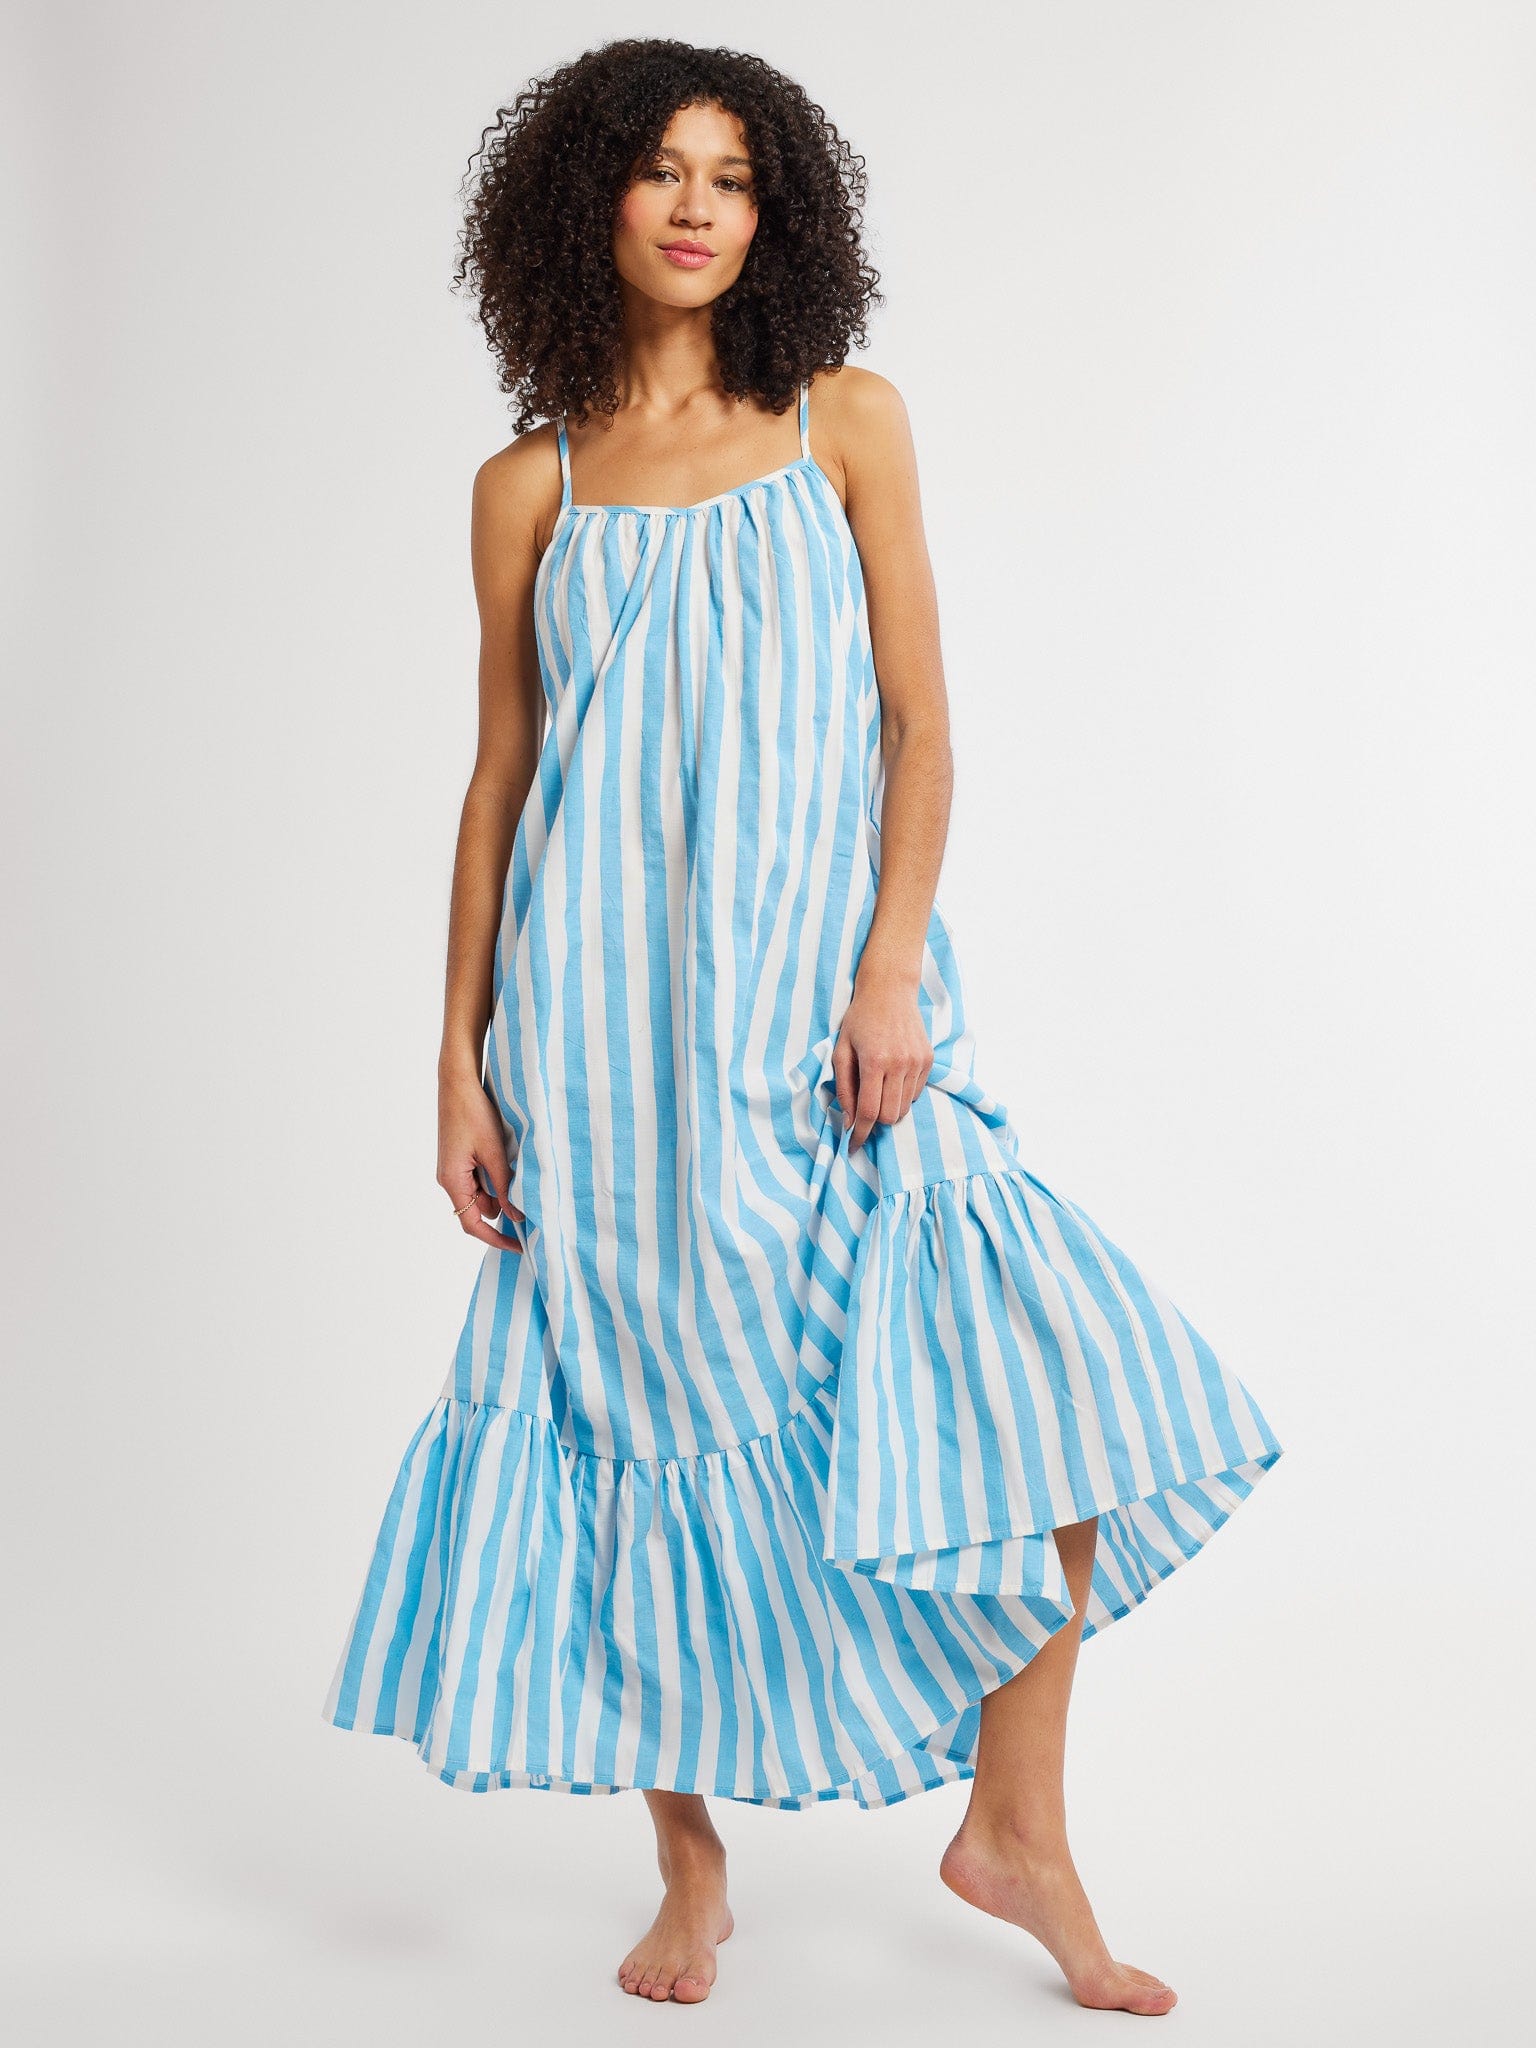 MILLE Clothing Sienna Dress in Atoll Stripe